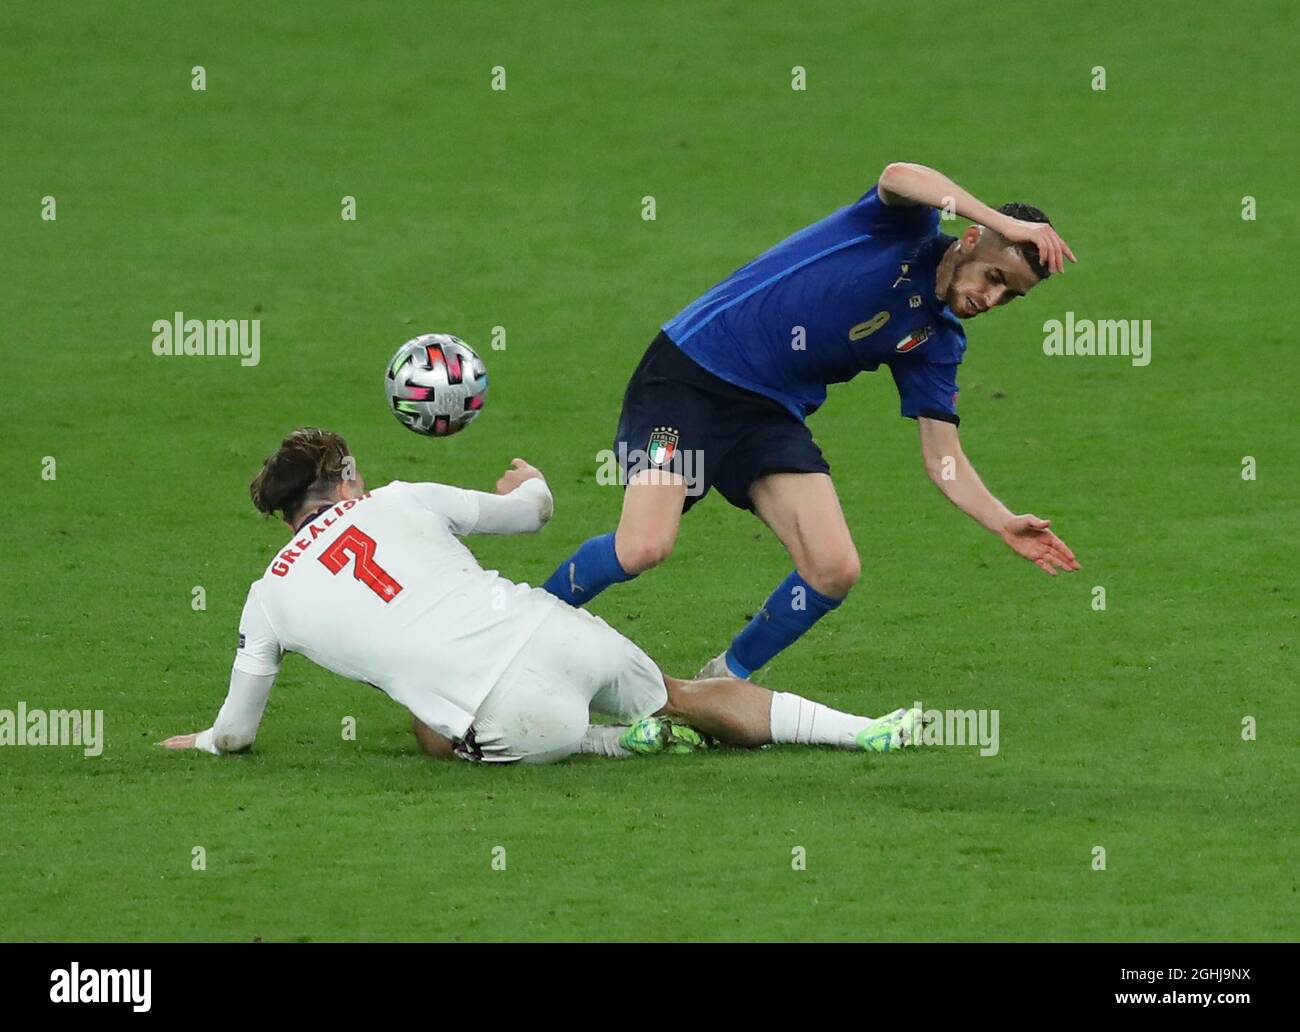 London, England, 11th July 2021. Jorginho of Italy challenges Jack Grealish of England  during the UEFA Euro 2020 final at Wembley Stadium, London. Picture credit should read: David Klein / Sportimage via PA Images Stock Photo